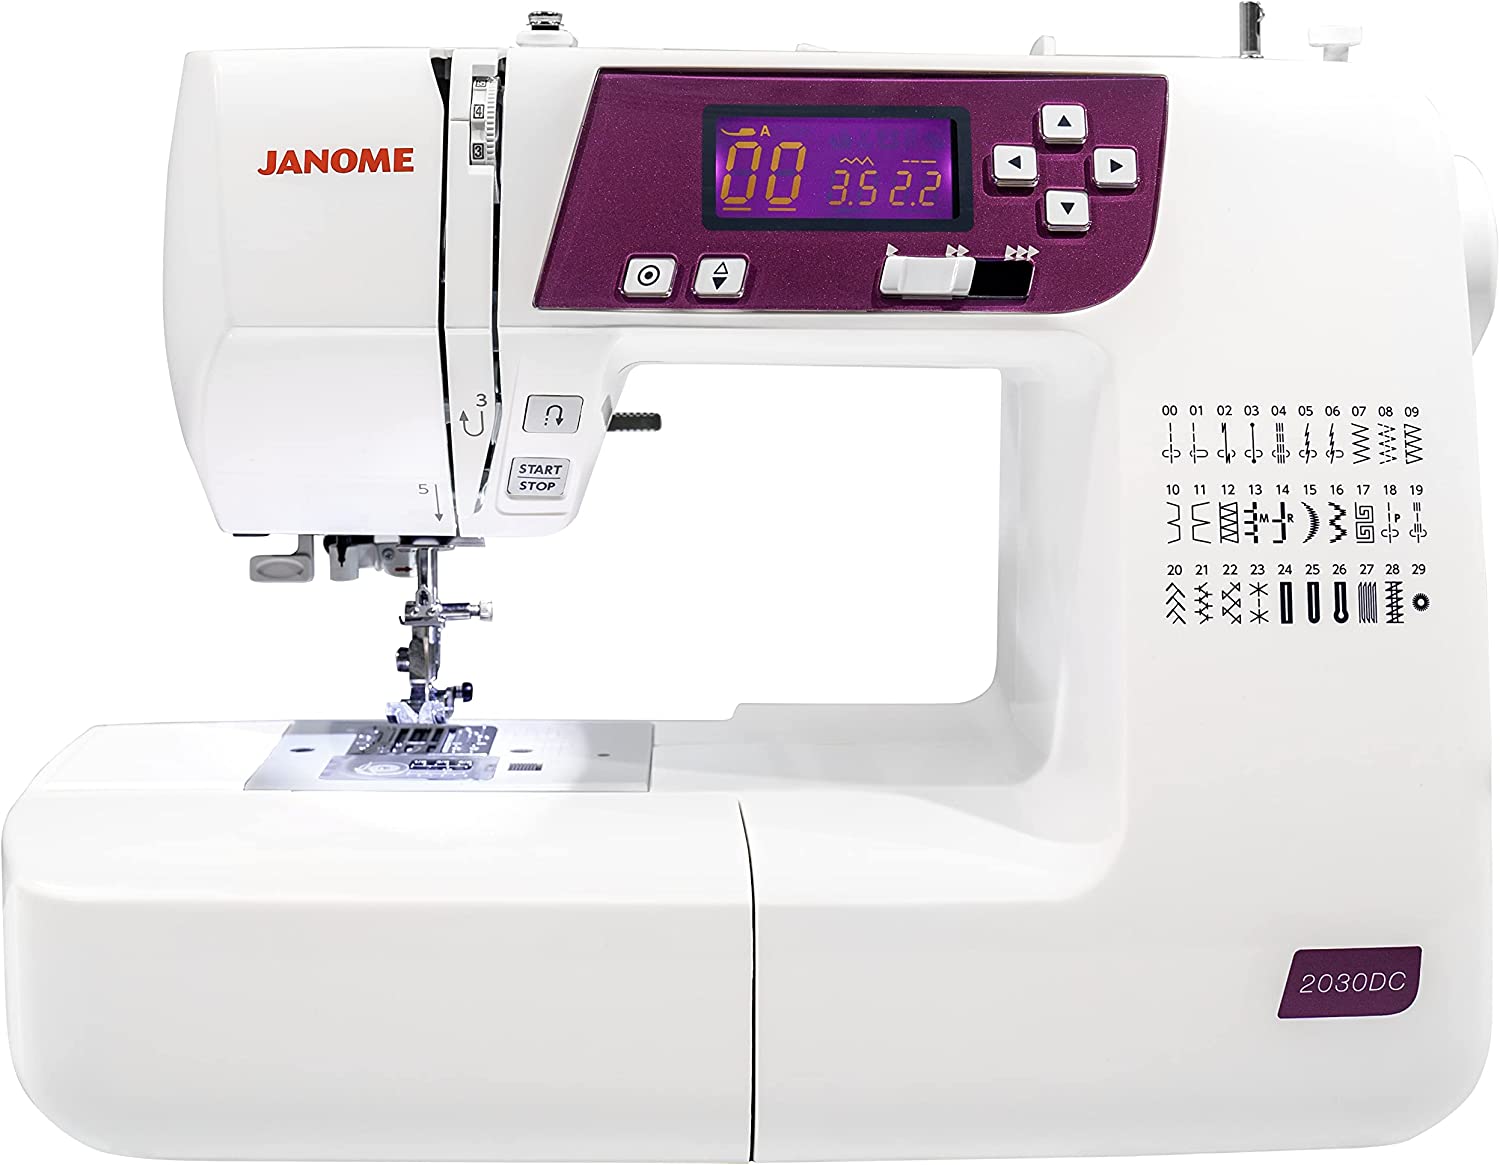 front facing image of the Janome 2030QDC-G Sewing and Quilting Machine